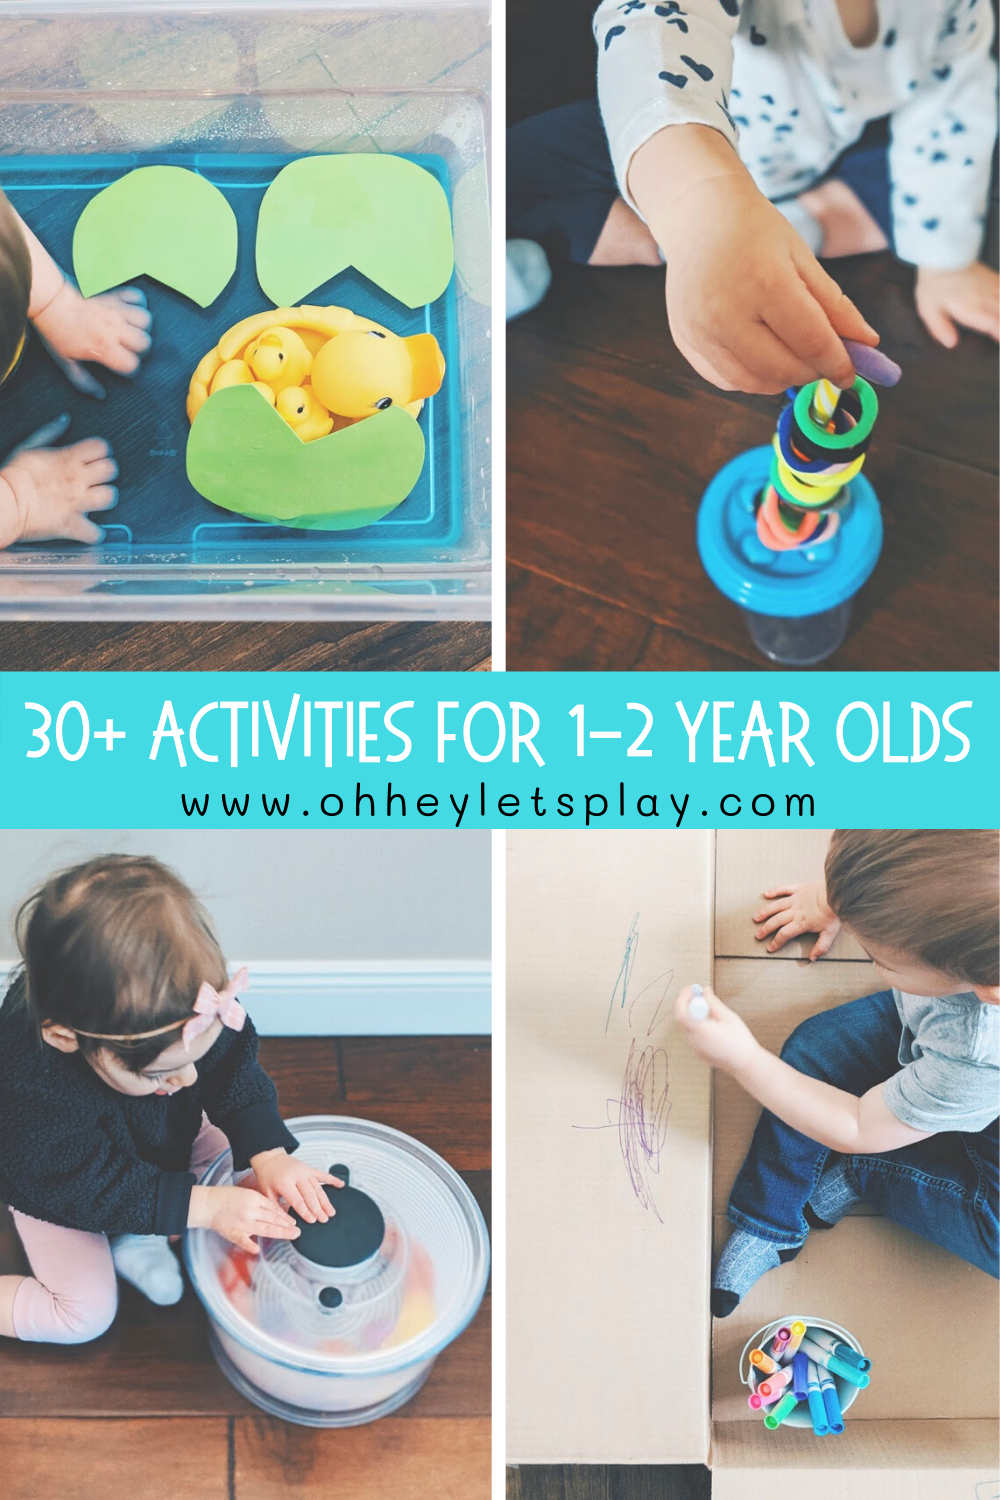 30+ Best Gifts for 9 Year Olds (and older) - Busy Toddler